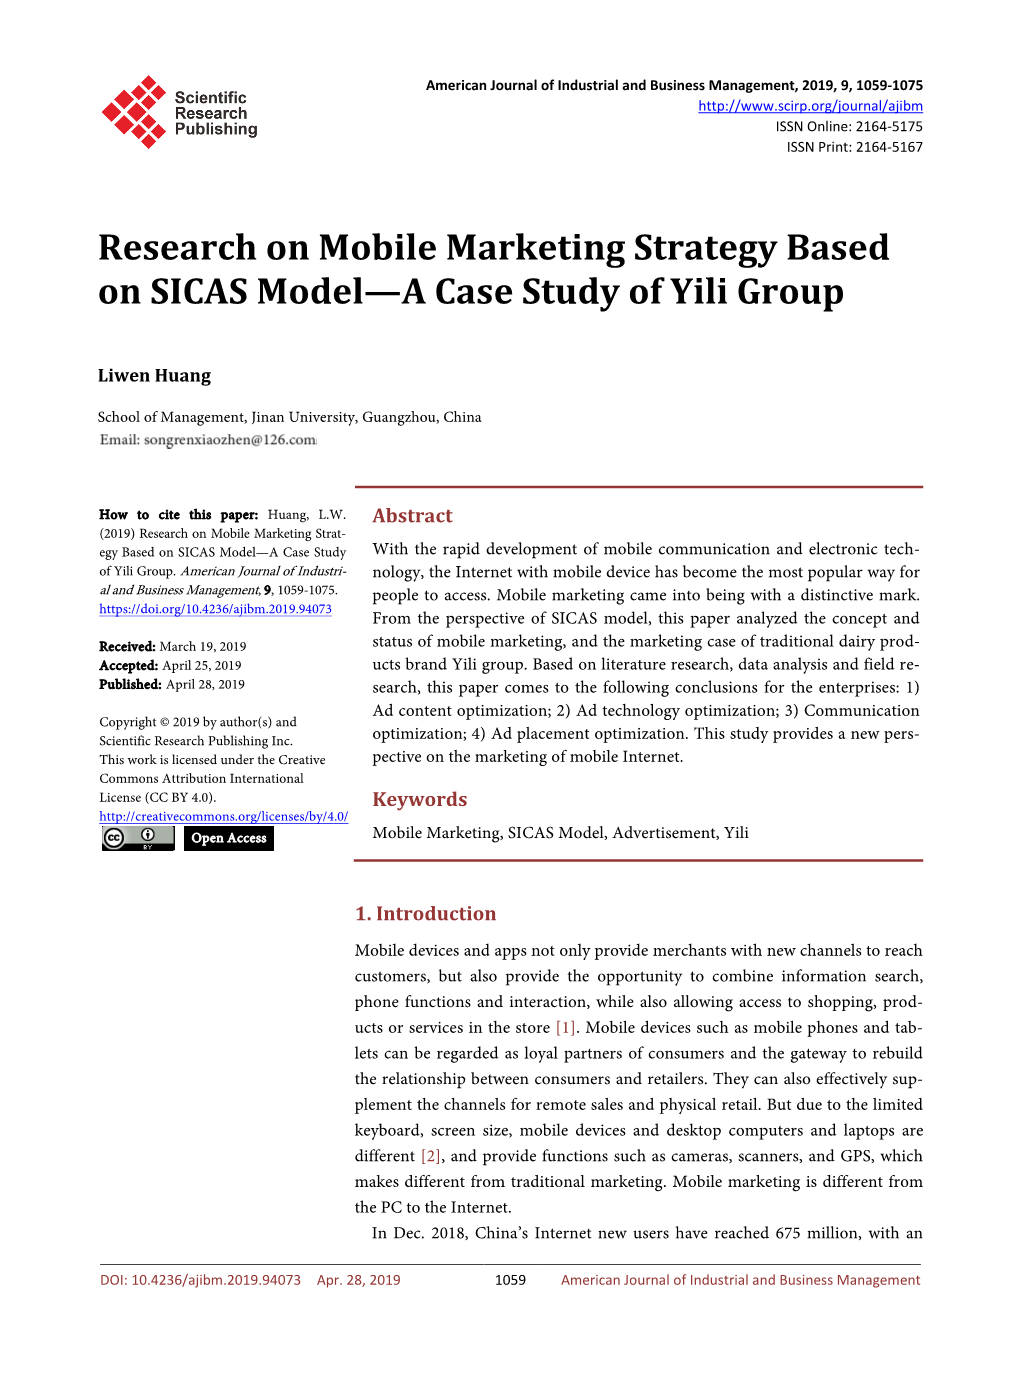 Research on Mobile Marketing Strategy Based on SICAS Model—A Case Study of Yili Group